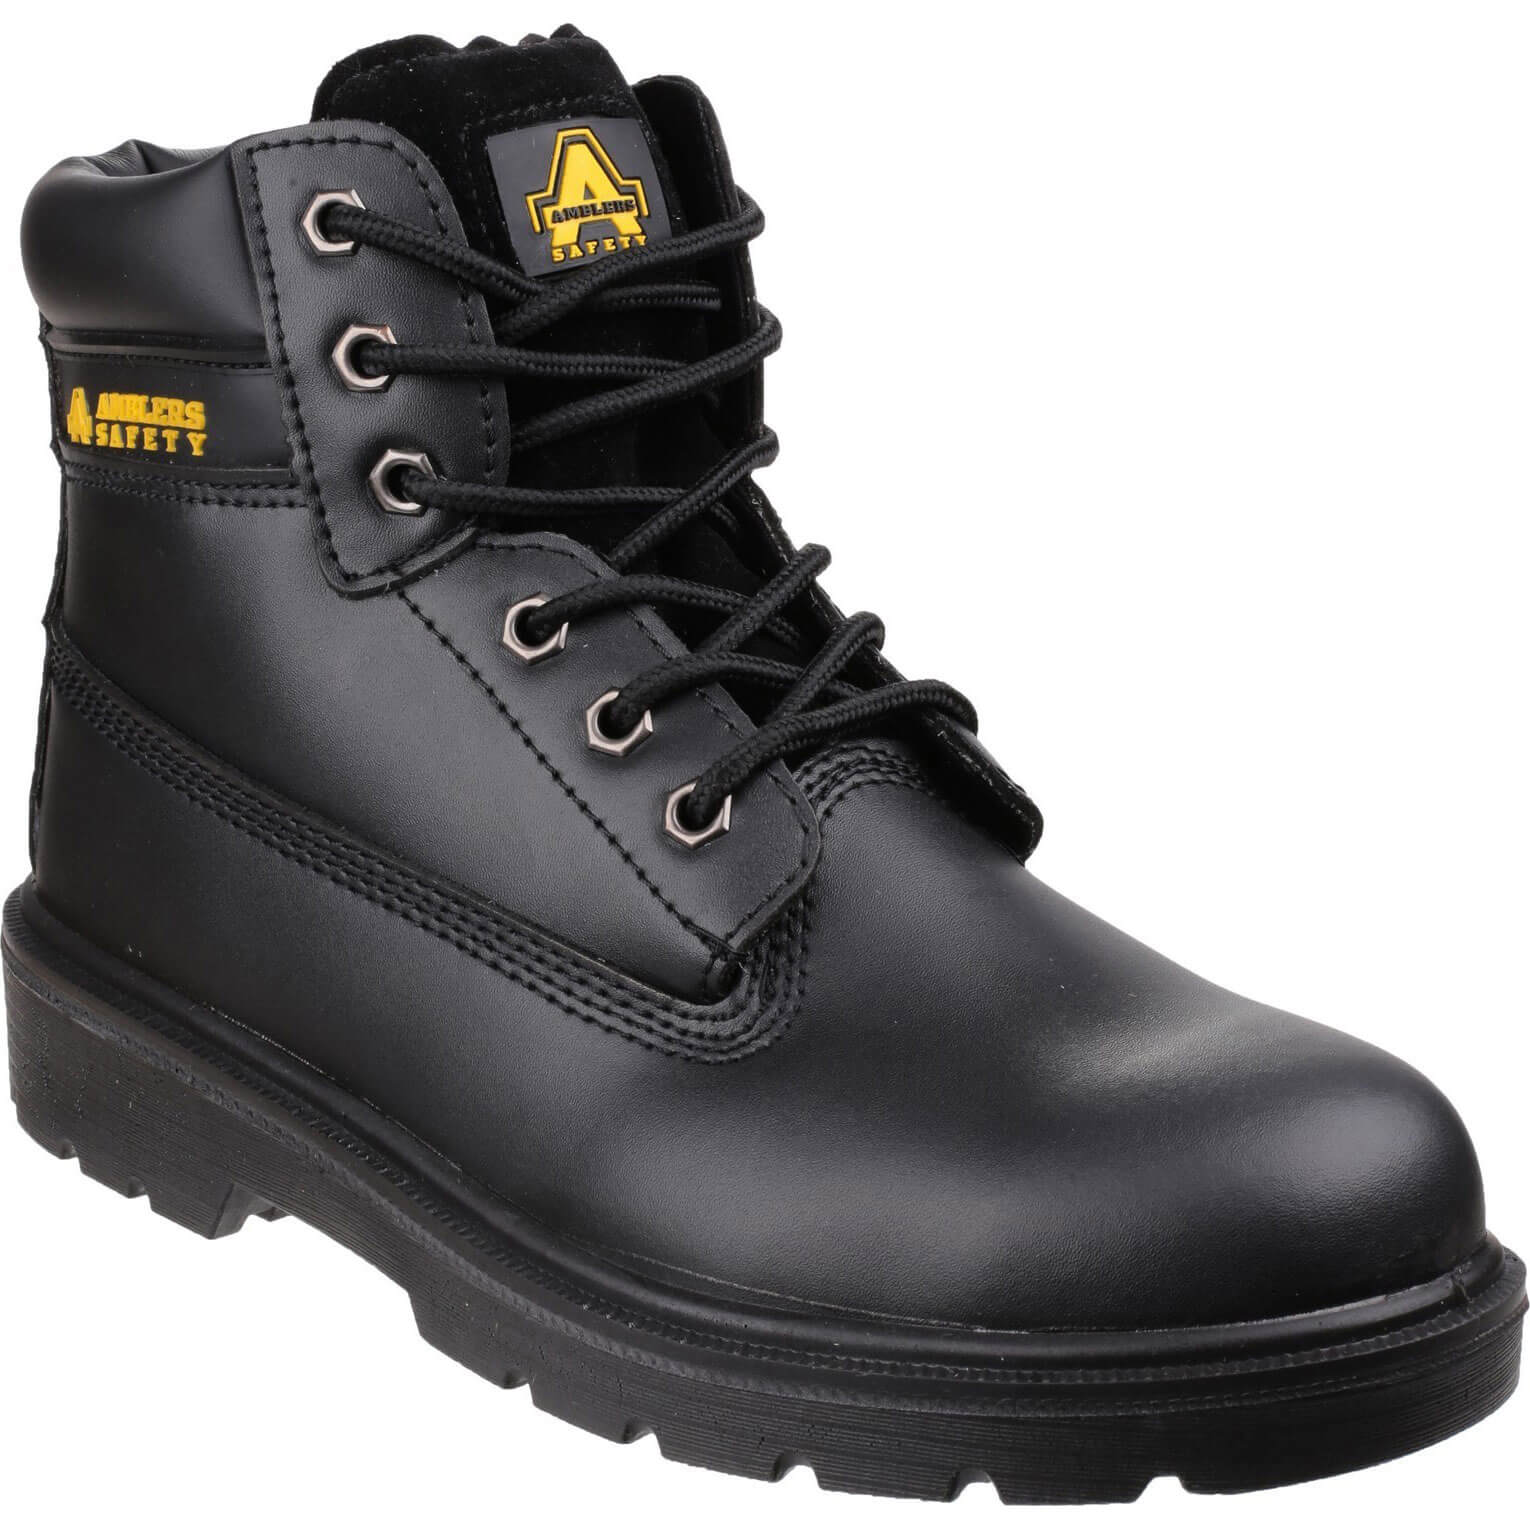 Photo of Amblers Mens Safety Fs112 Safety Boots Black Size 10.5